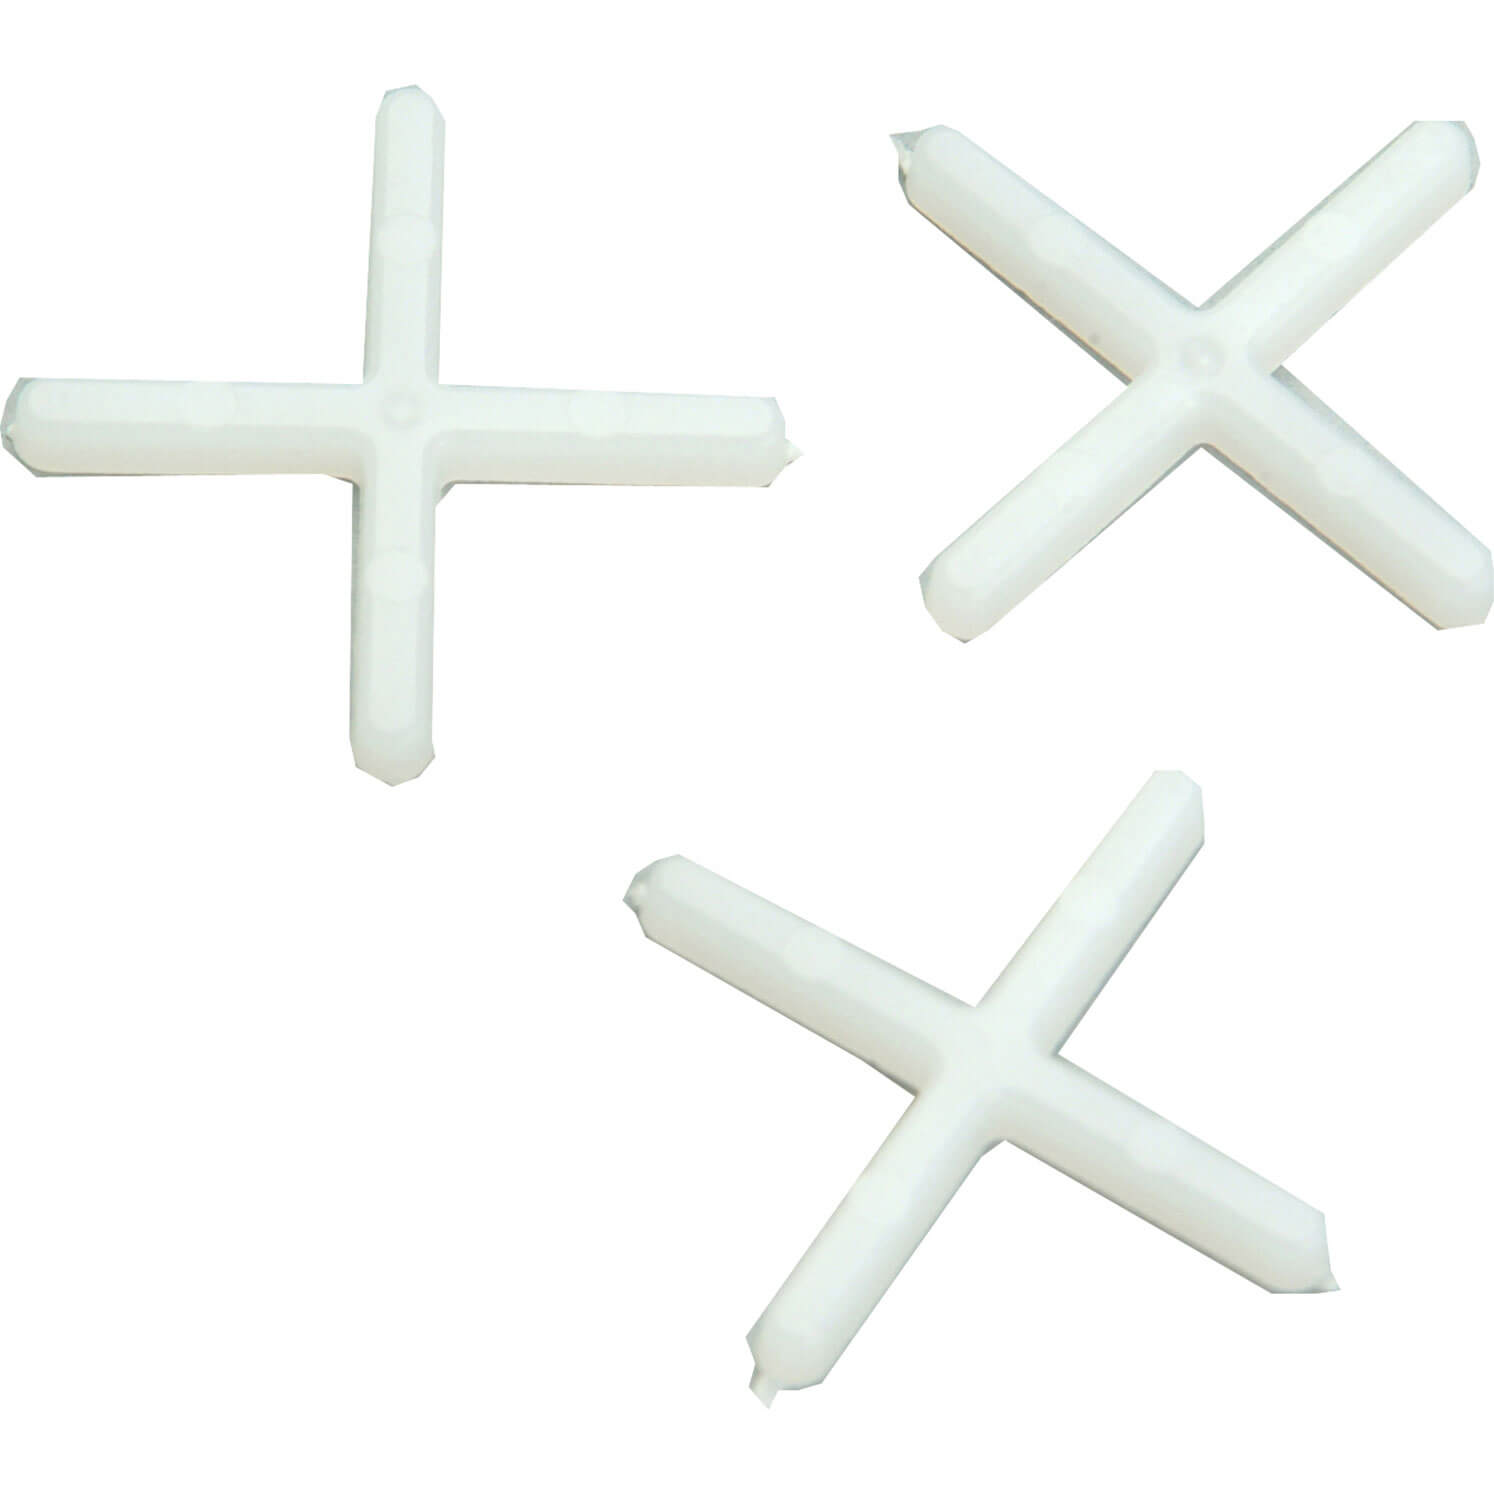 Image of Vitrex Plastic Wall Tile Spacers 1.5mm Pack of 250